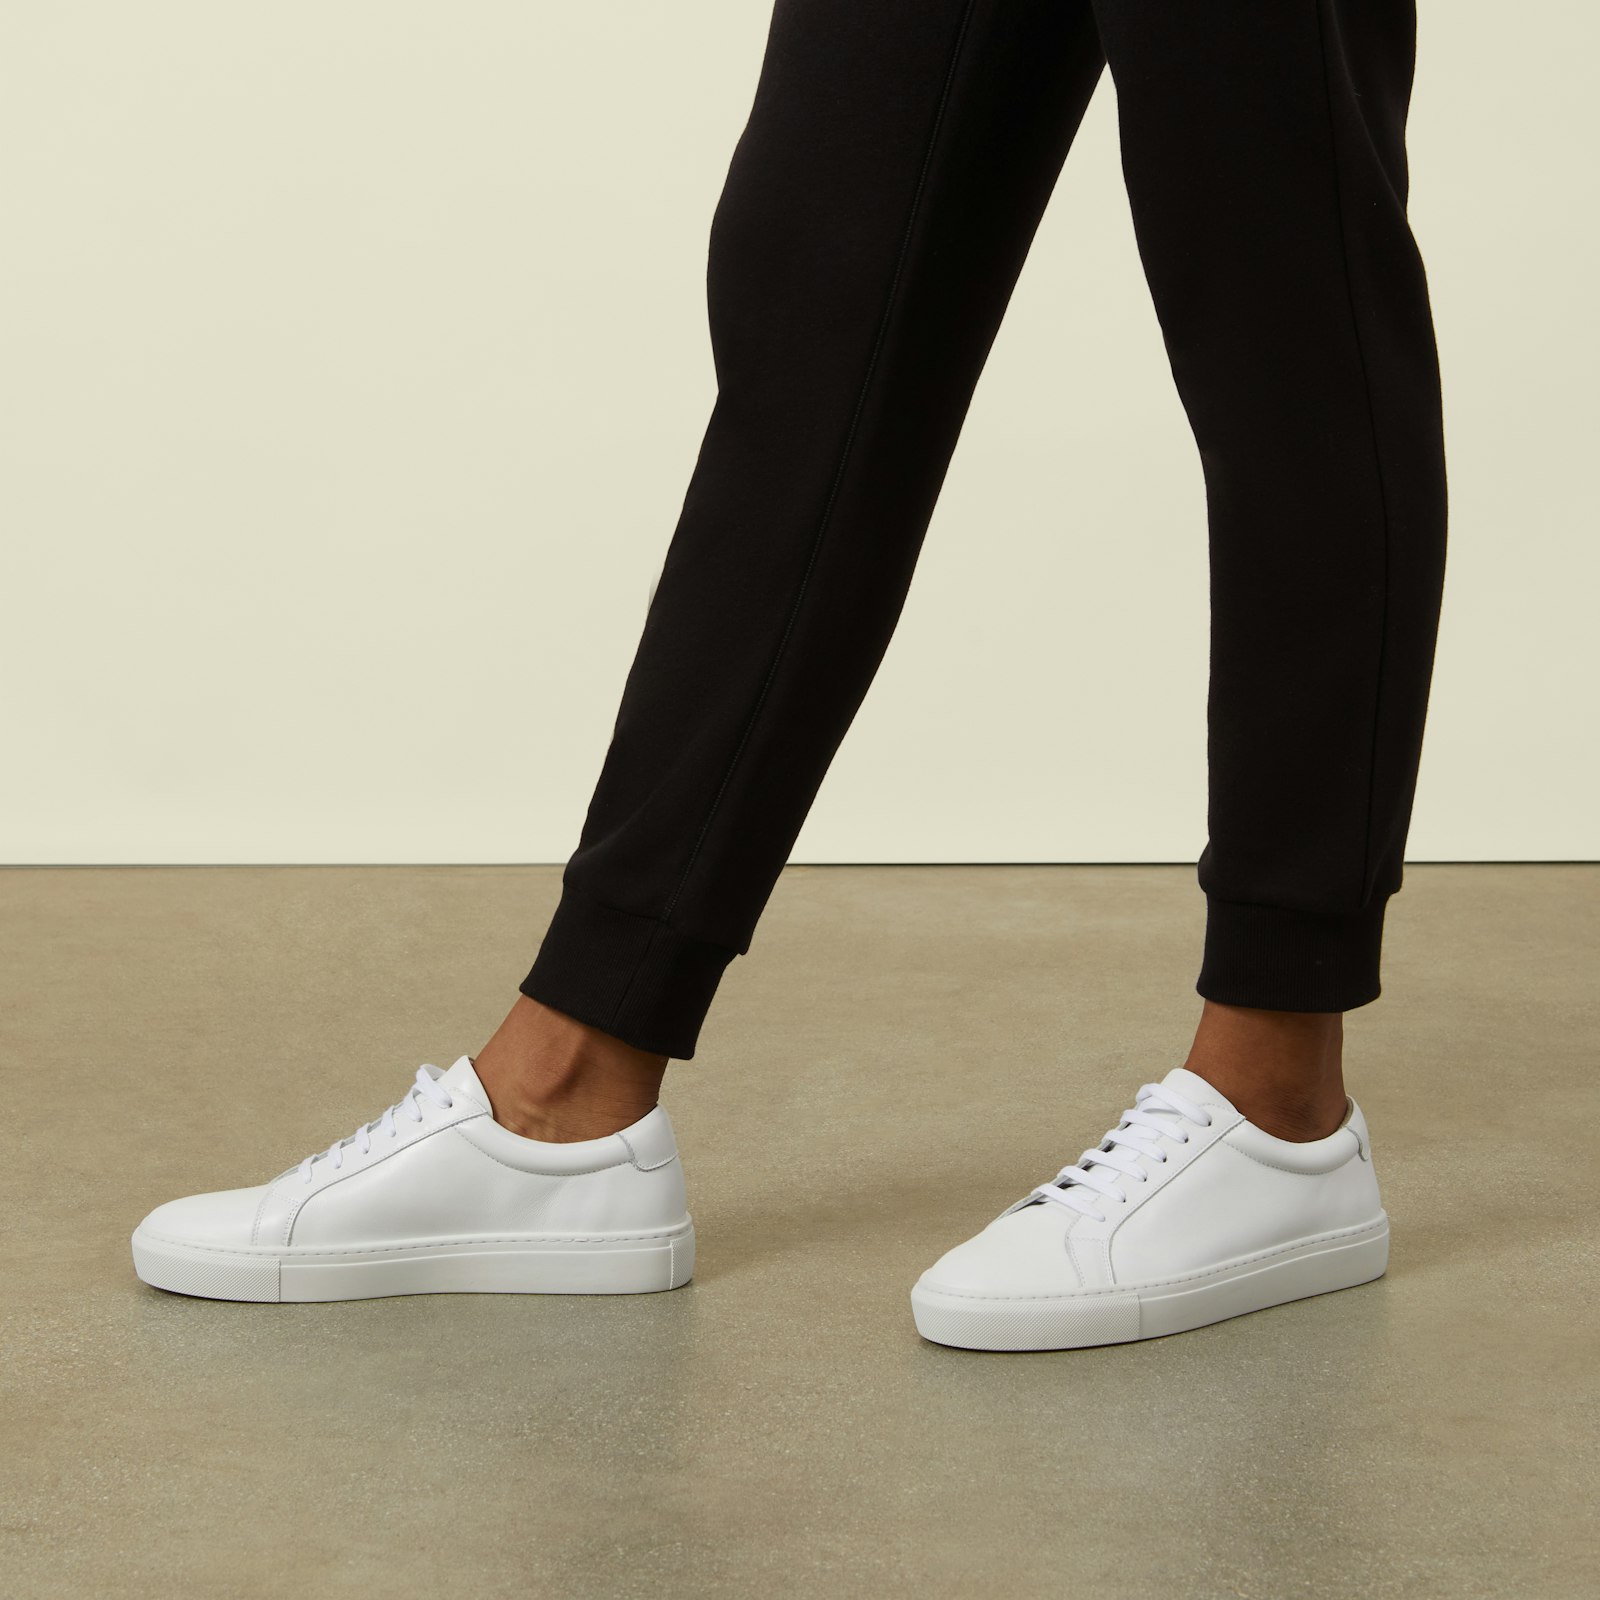 Candace_LeatherSneaker_White_Figure_CropScale1.jpg